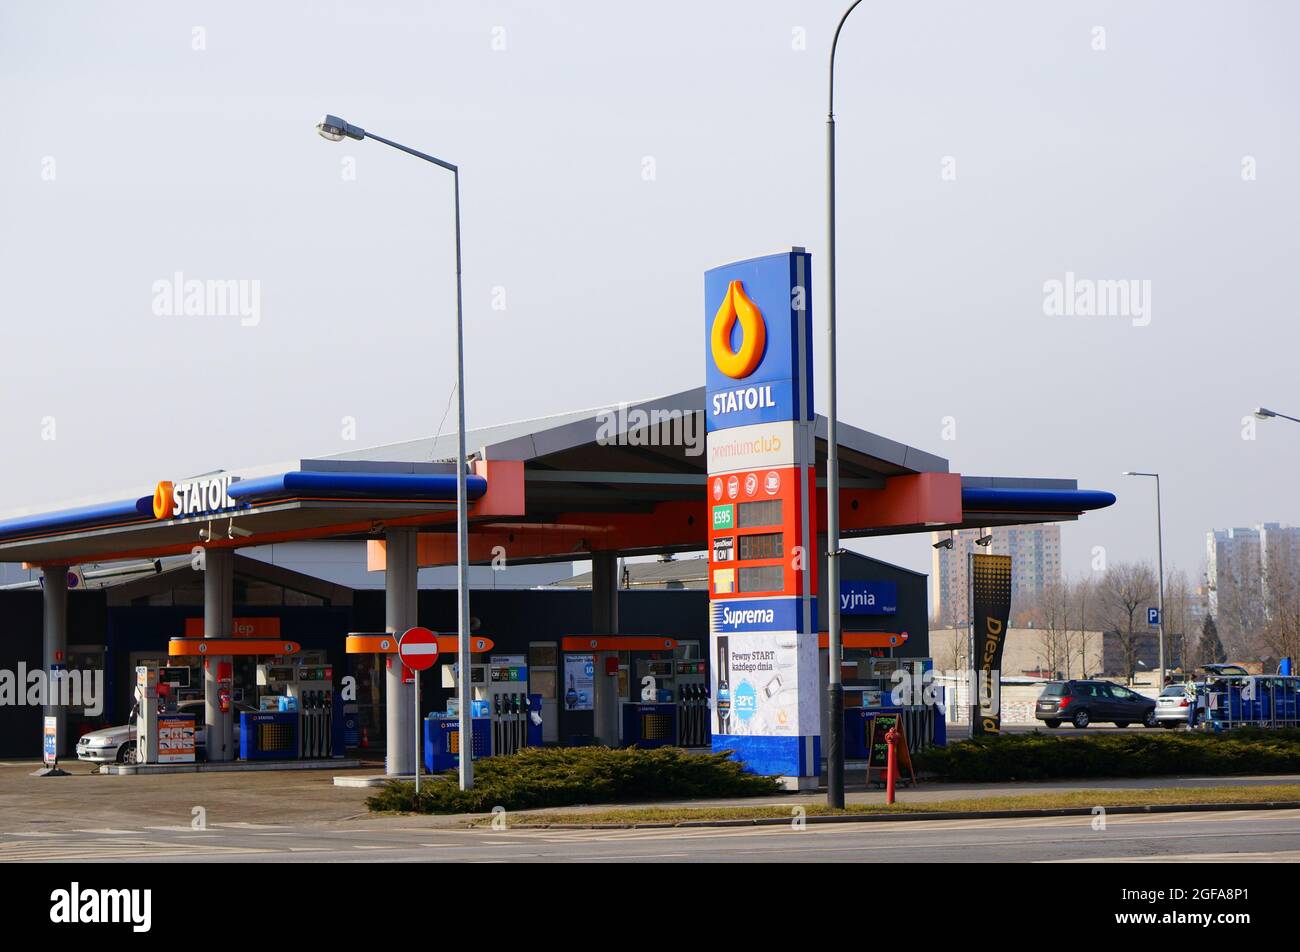 POZNAN, POLAND - Feb 23, 2015: A big Statoil gas station with parked cars Stock Photo